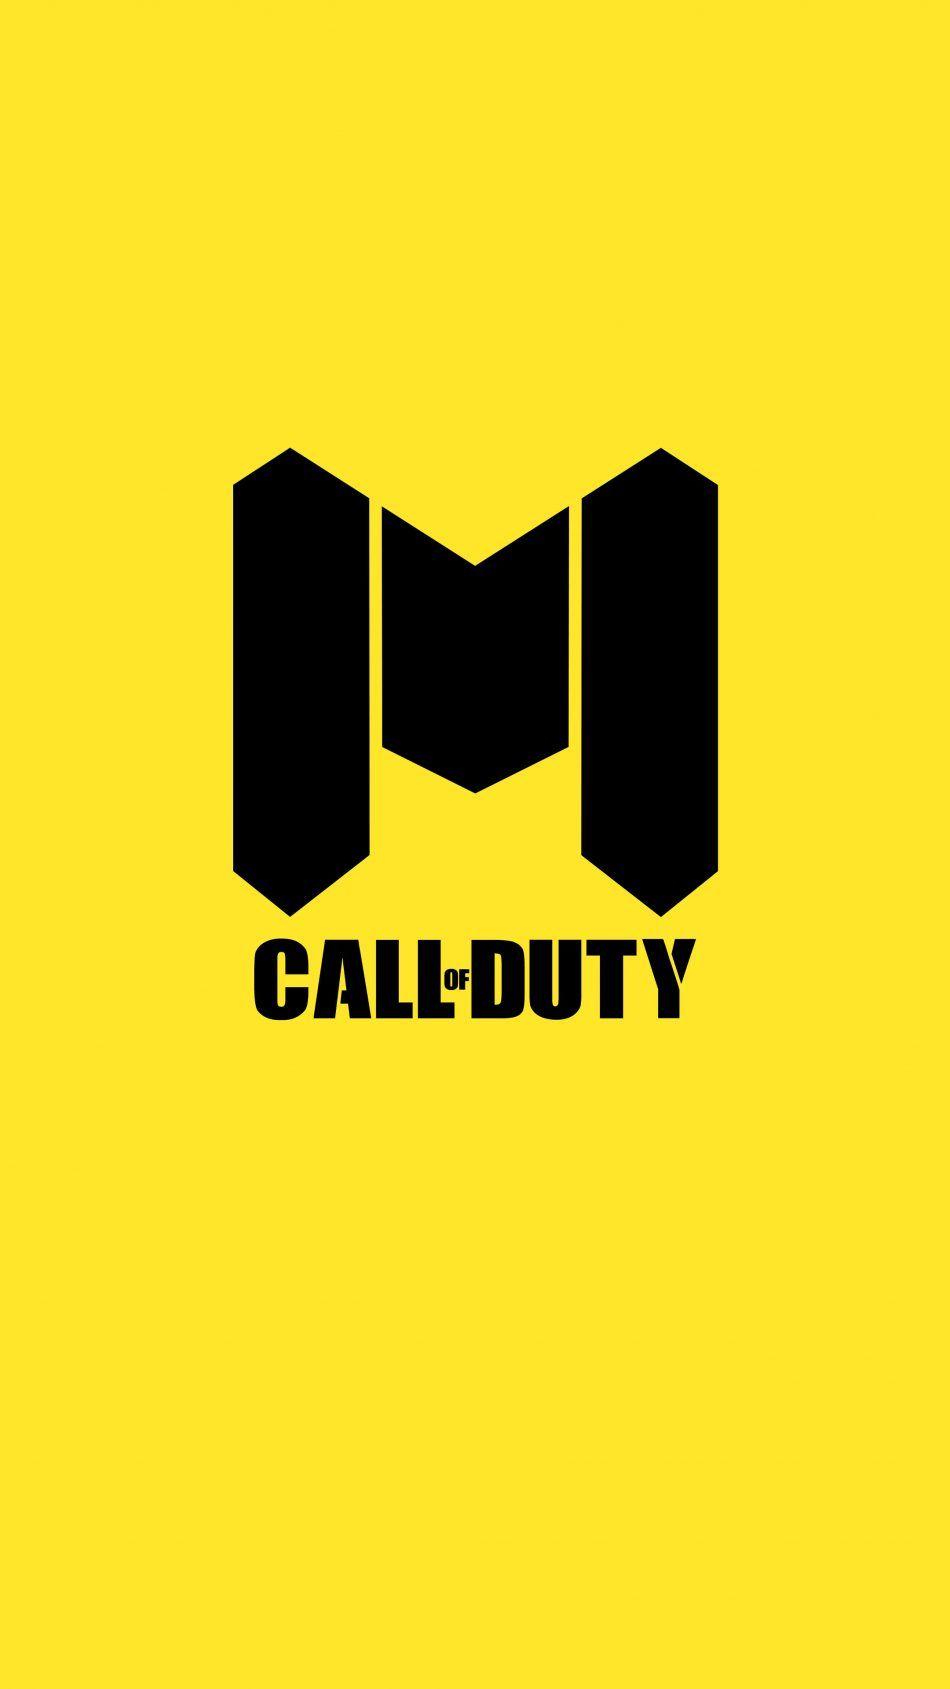 Call of Duty Mobile Logo Yellow Background 4K Ultra HD Mobile Wallpaper. Call of duty, Mobile logo, Call of duty black